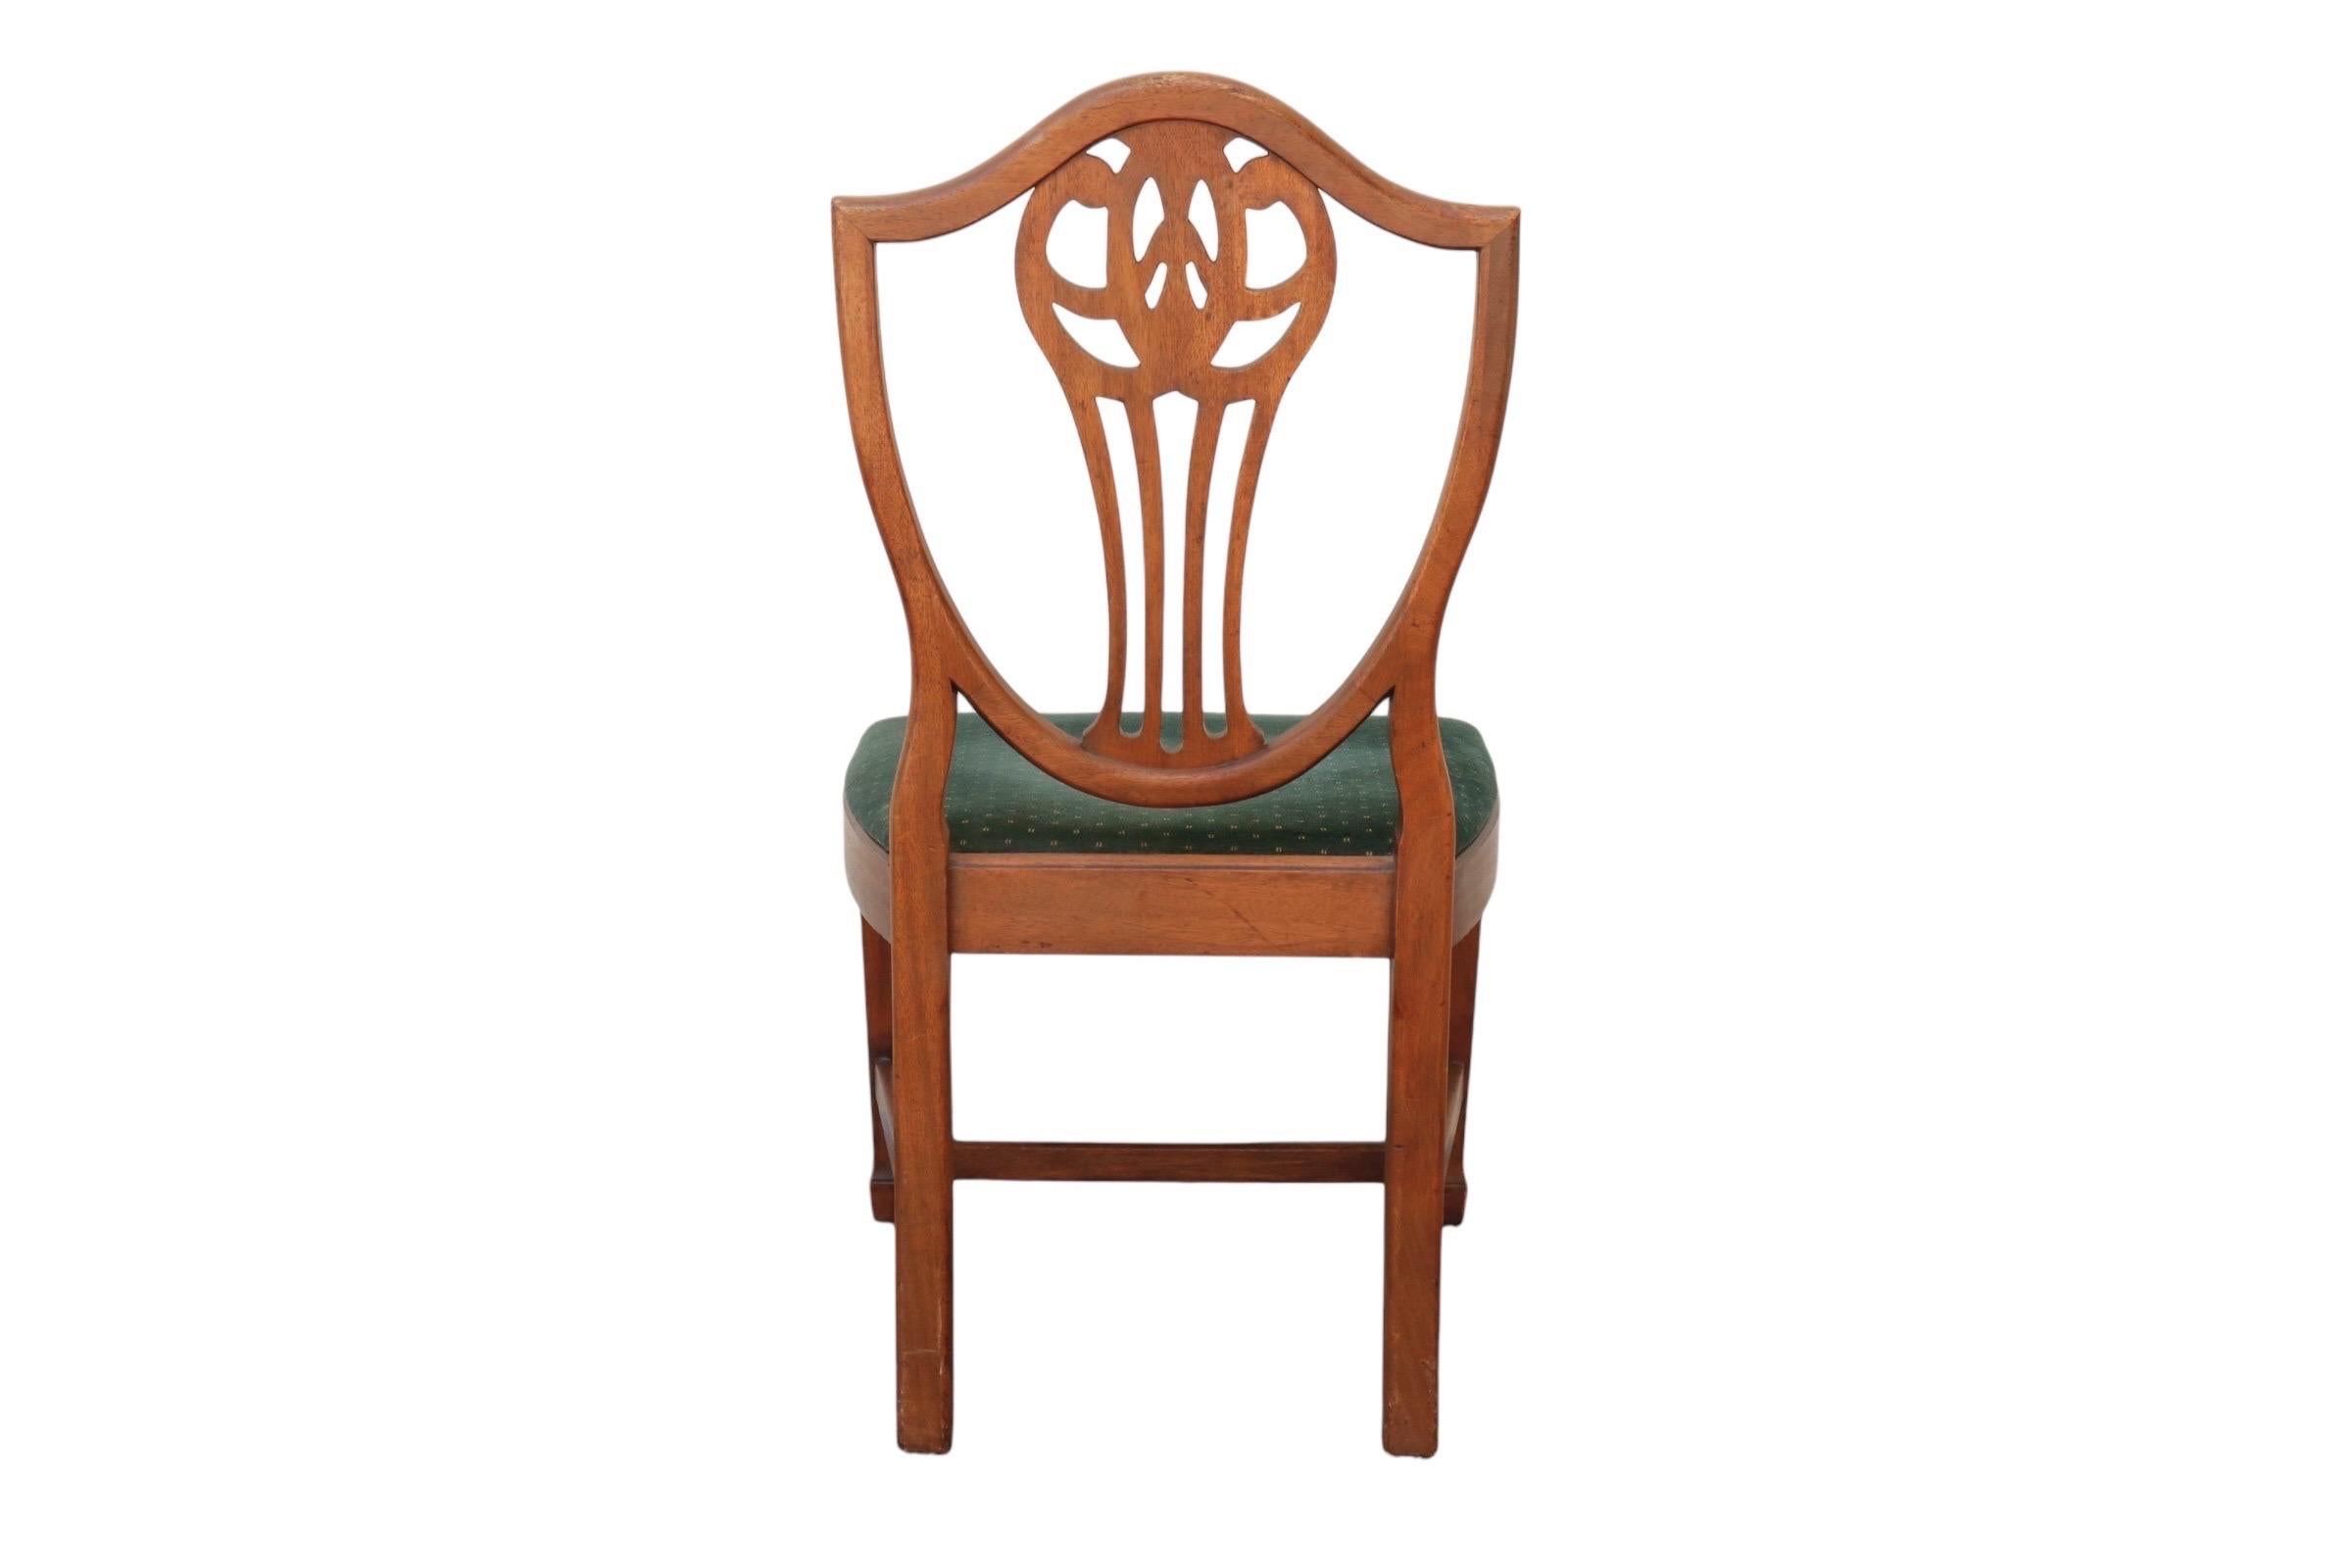 1937 Macys Shield Back Dining Chairs - Set of 6 In Good Condition For Sale In Bradenton, FL